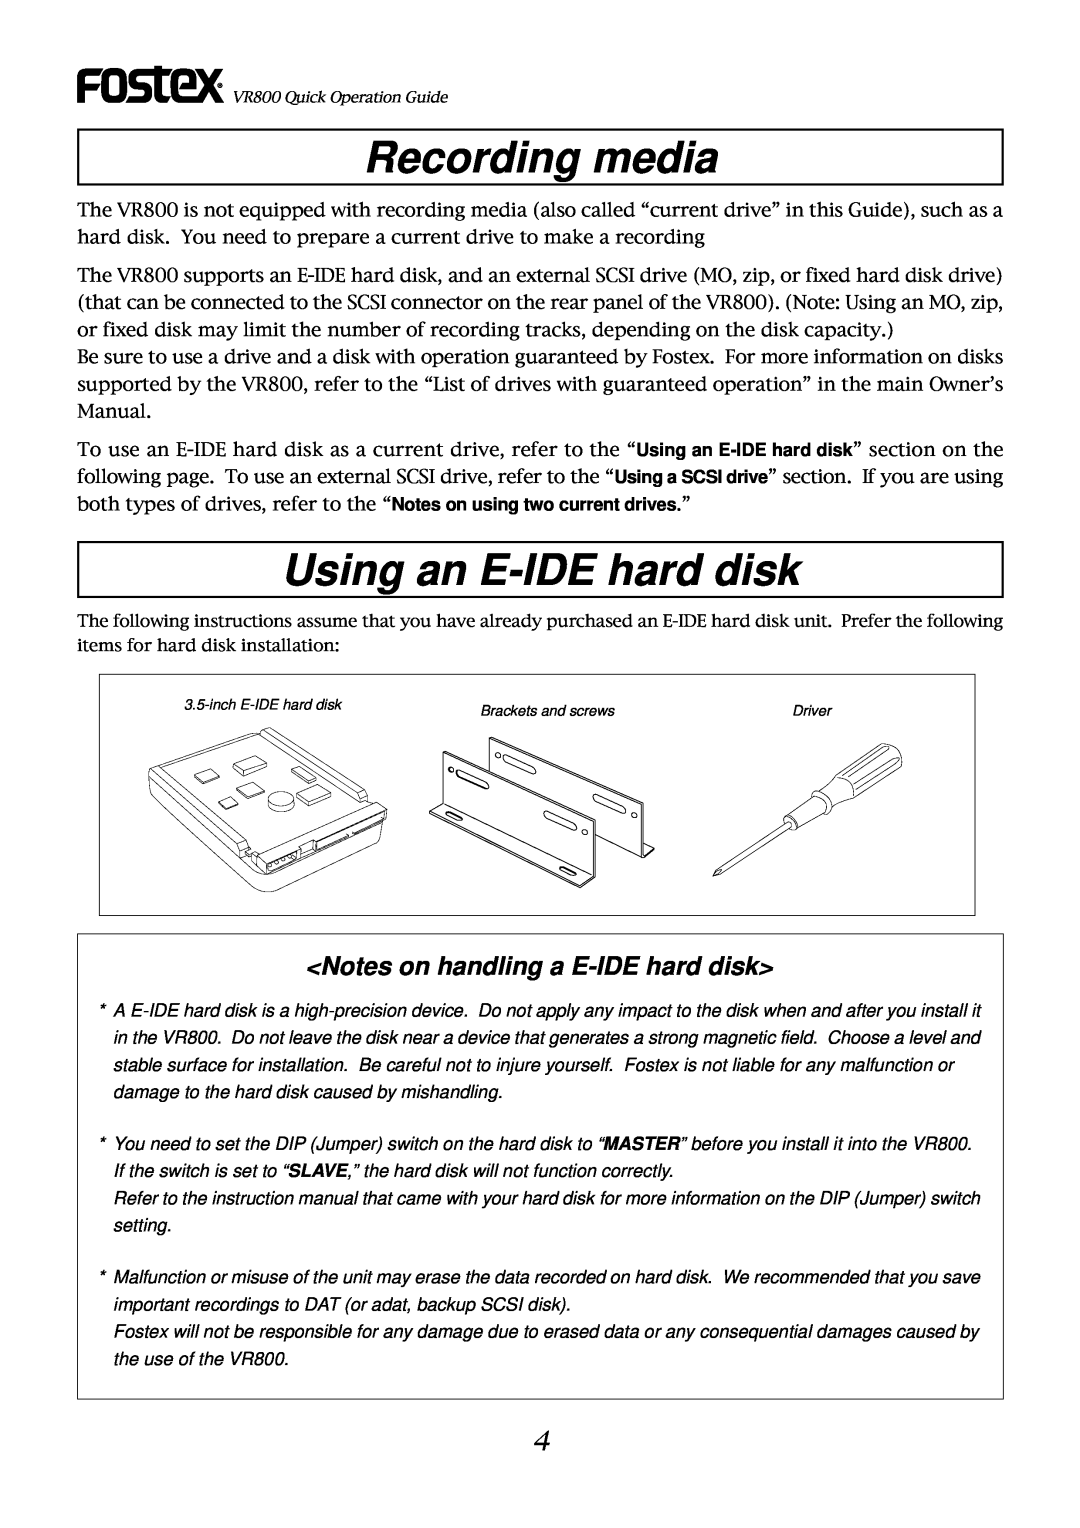 Fostex VR800 owner manual Recording media, Using an E-IDE hard disk, Notes on handling a E-IDE hard disk 